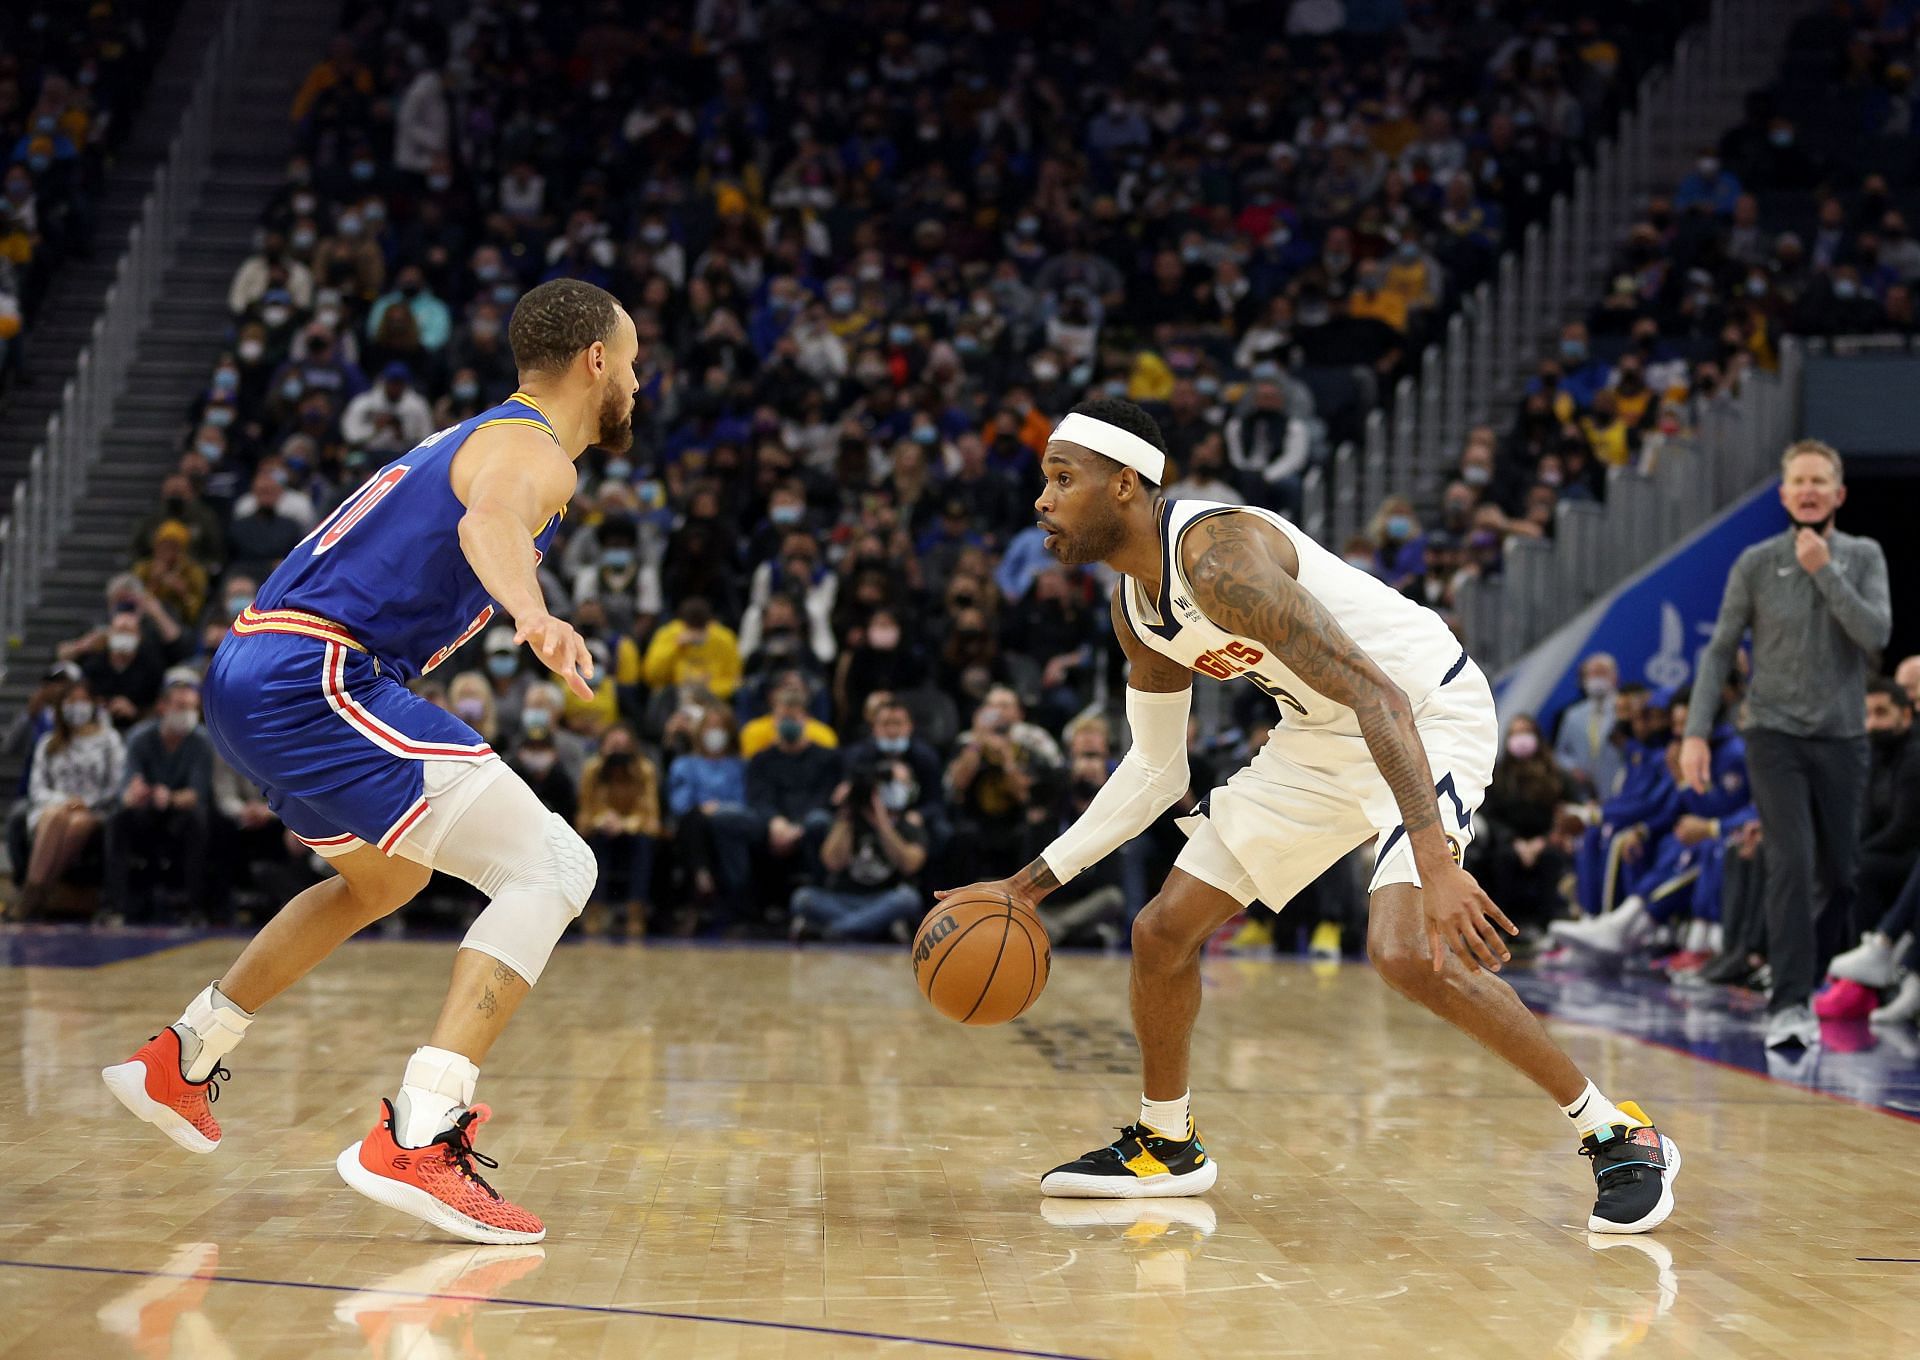 Will Barton of the Nuggets guarded by Steph Curry